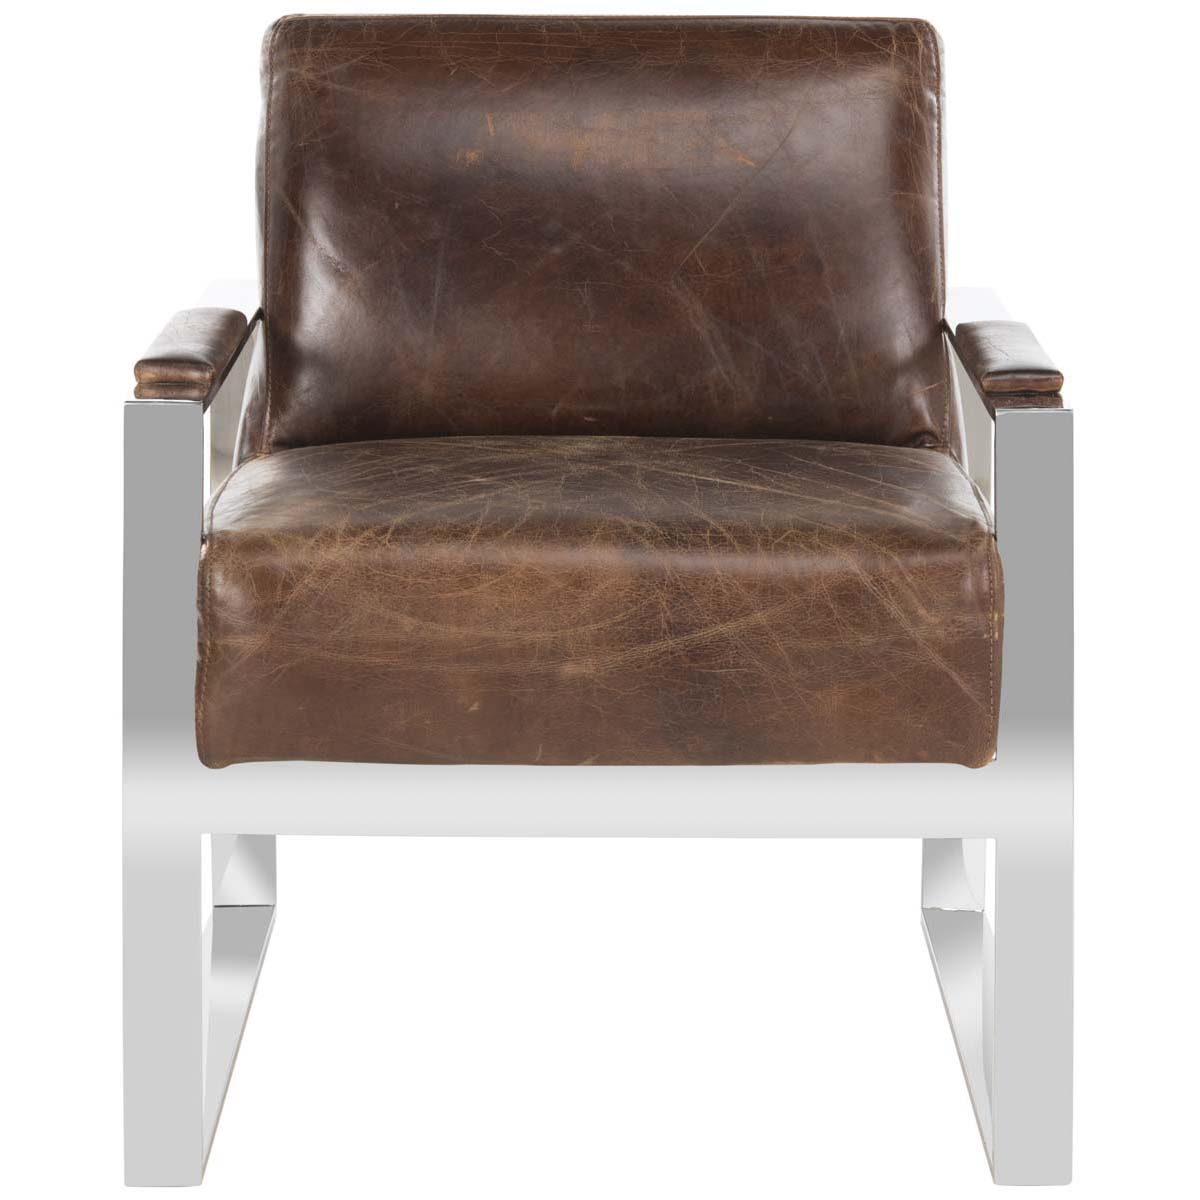 Safavieh Couture Parkgate Occassional Leather Chair - Vintage Cigar Brown